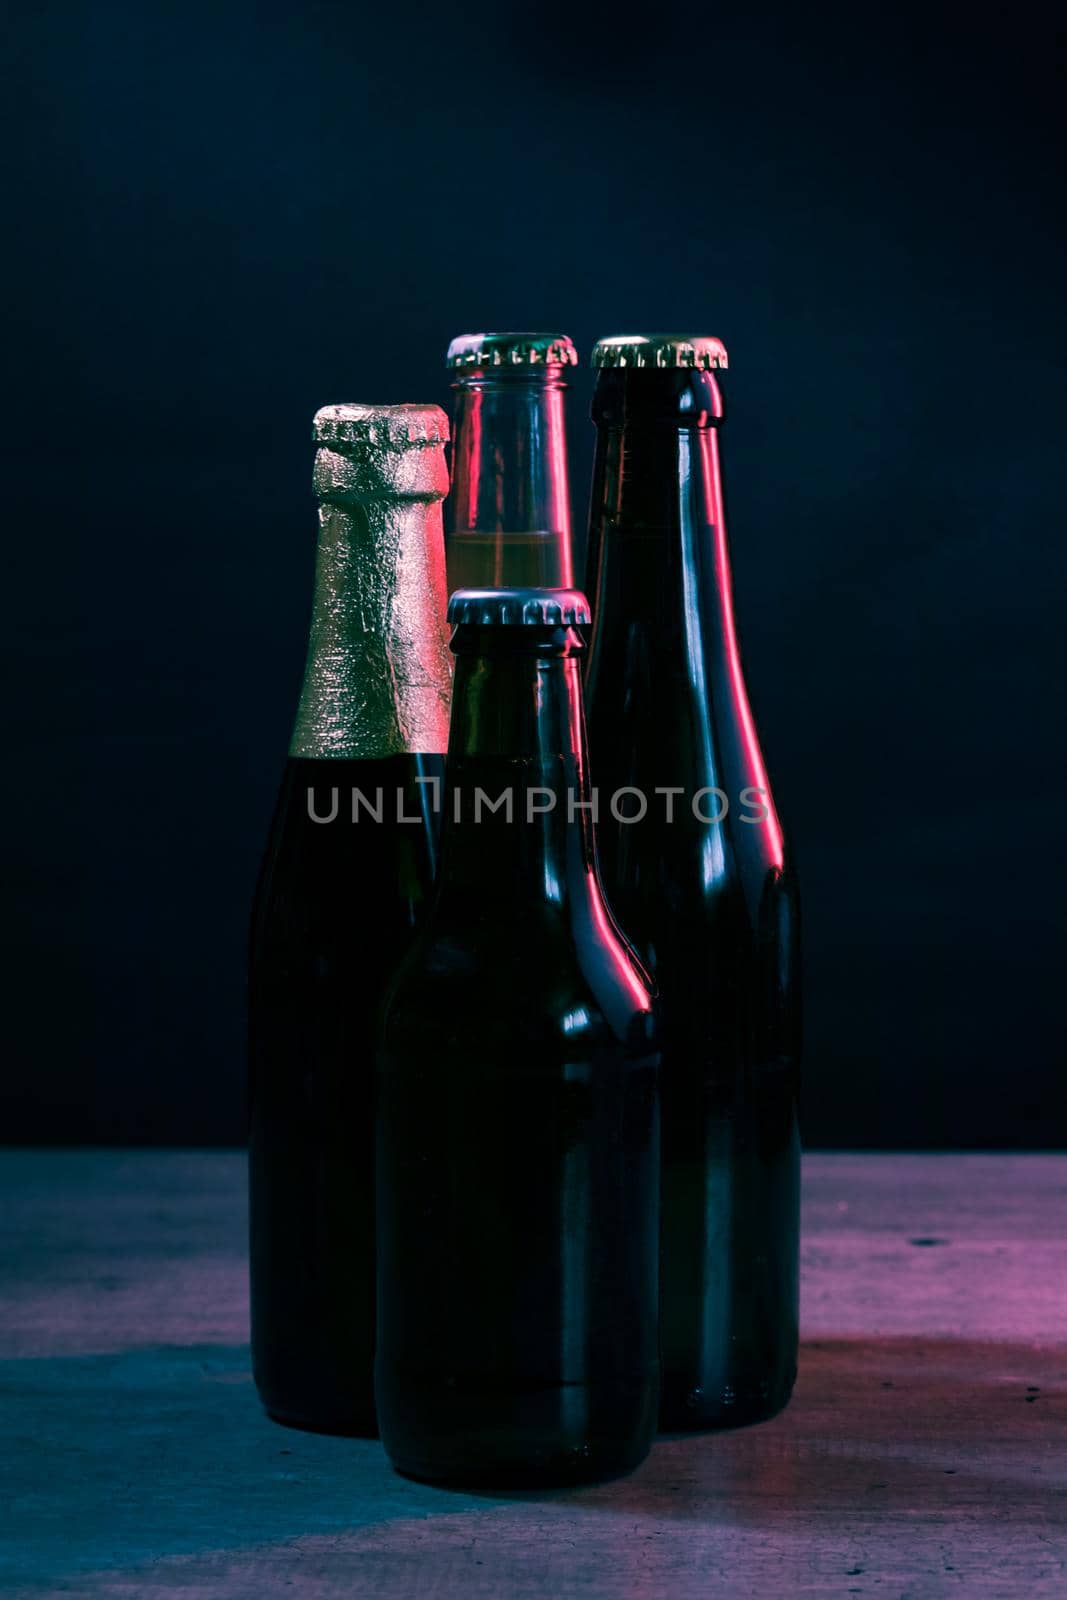 silhouettes of four beer bottles on a black background with blue and pink lights that illuminate them from one side.